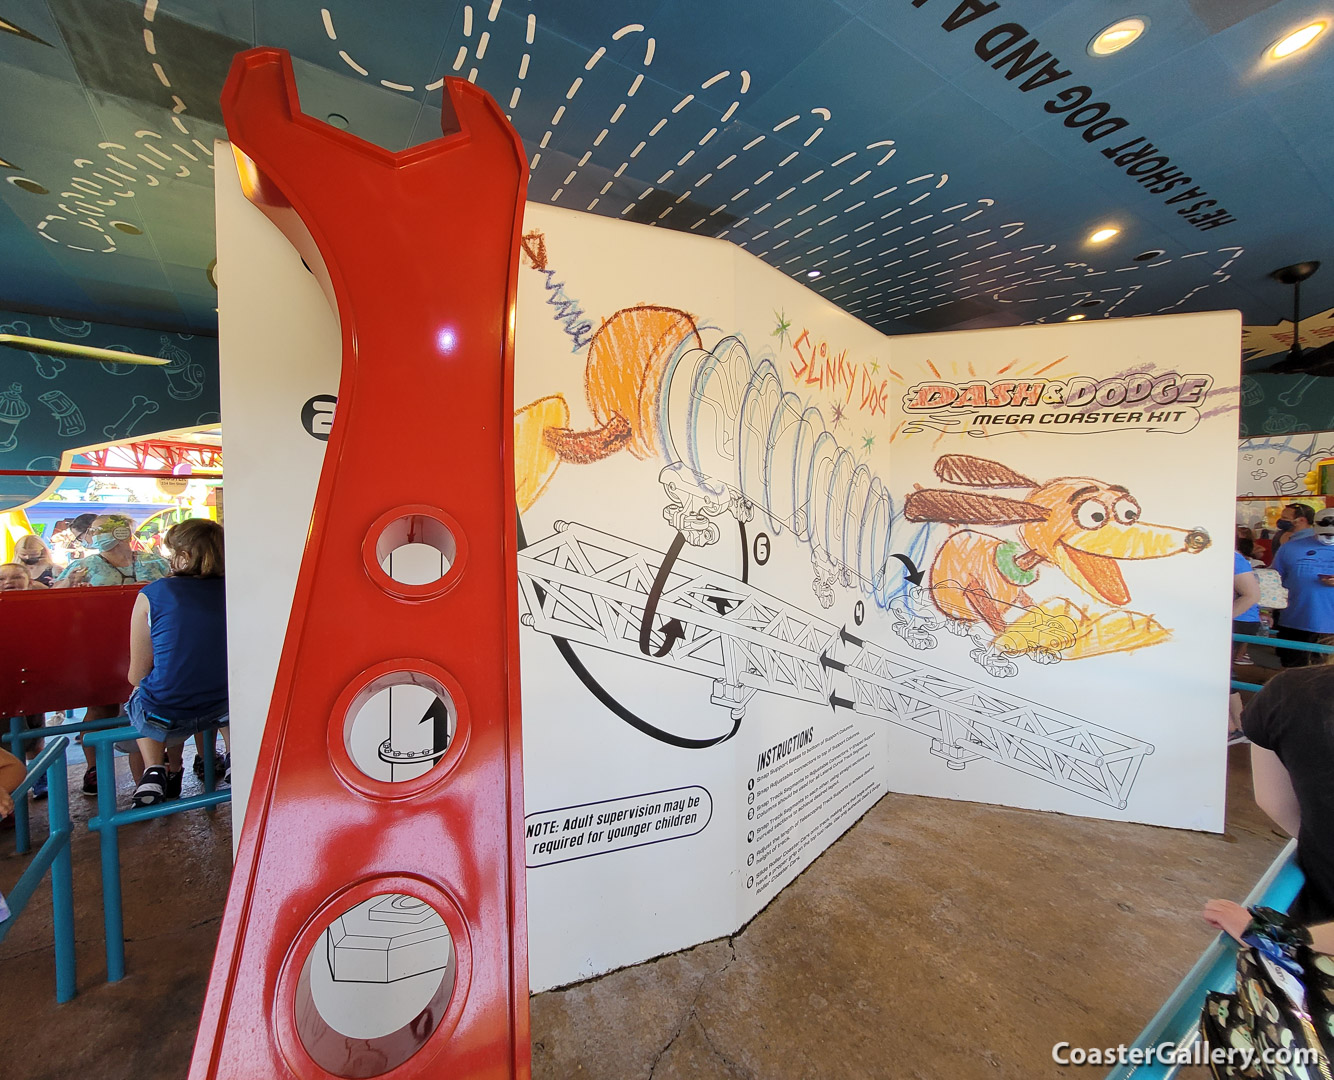 Pictures of the Slinky Dog Dash roller coaster waiting queue